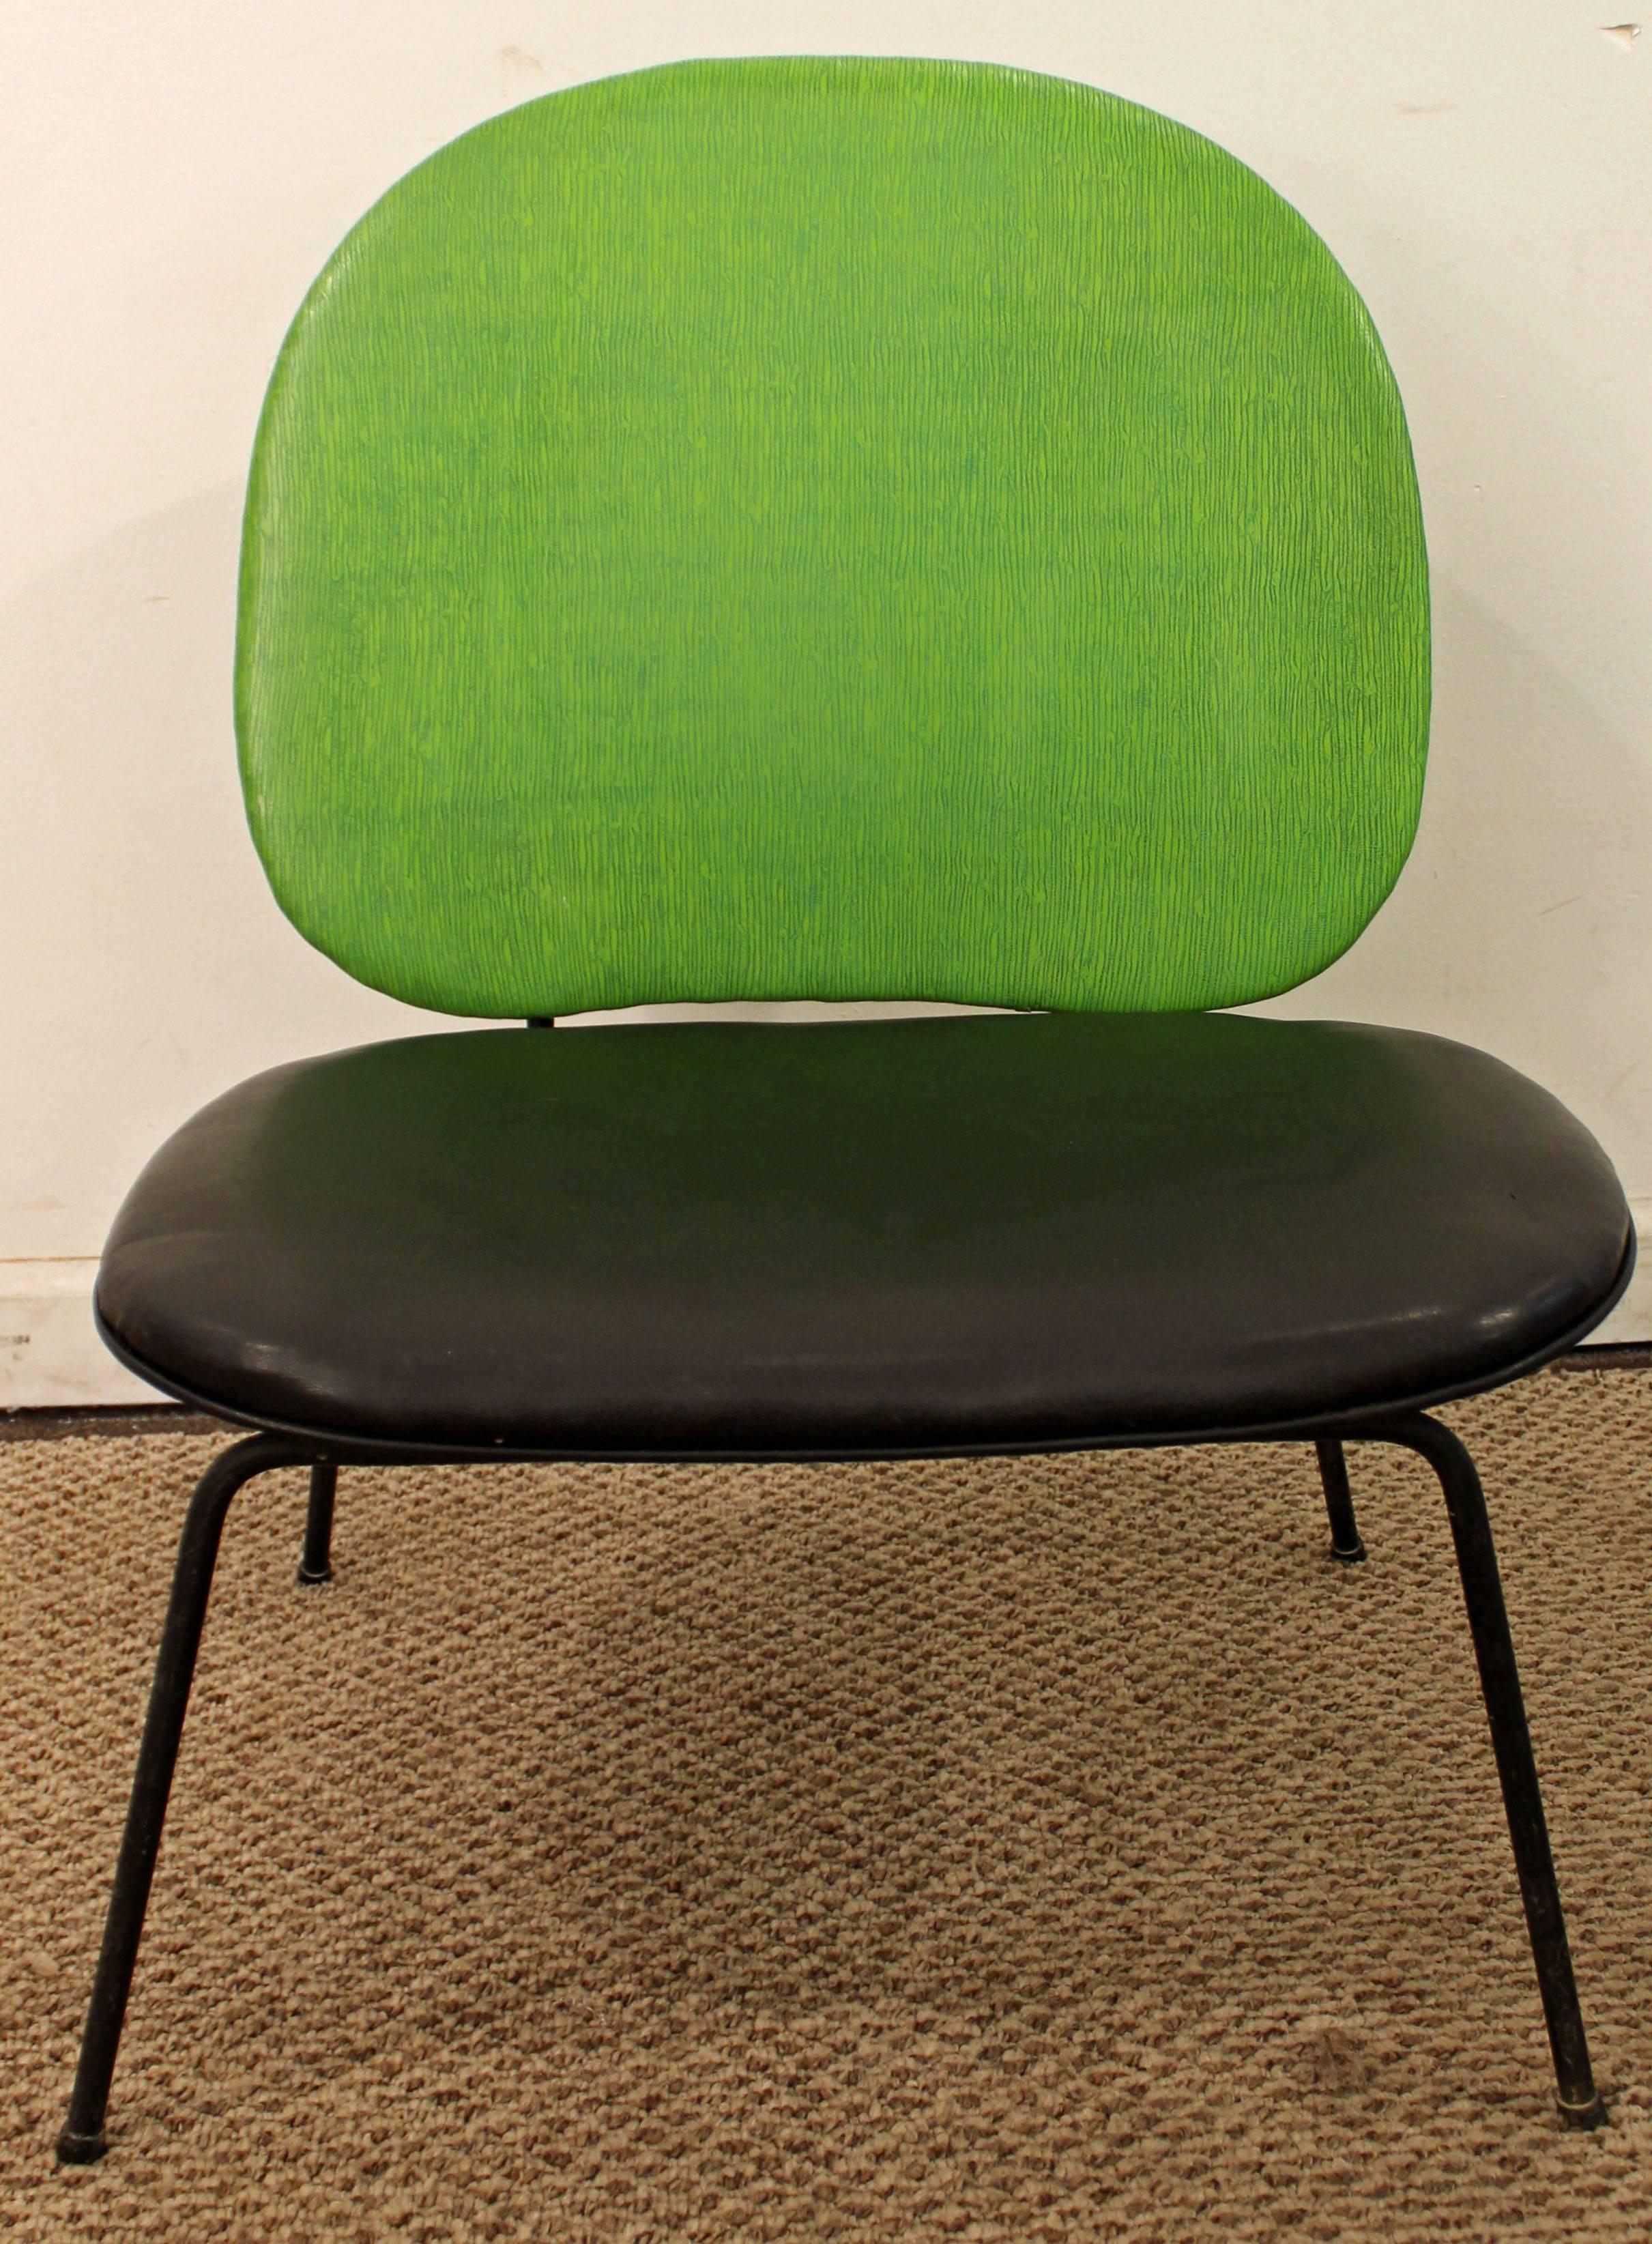 Offered is an great find: a mid-century modern chair, similar to the style of Paul McCobb. It has wire legs and vinyl upholstery. It is in good condition, but shows some age wear (missing one plug on seat back, wear on wire legs, slight tear and